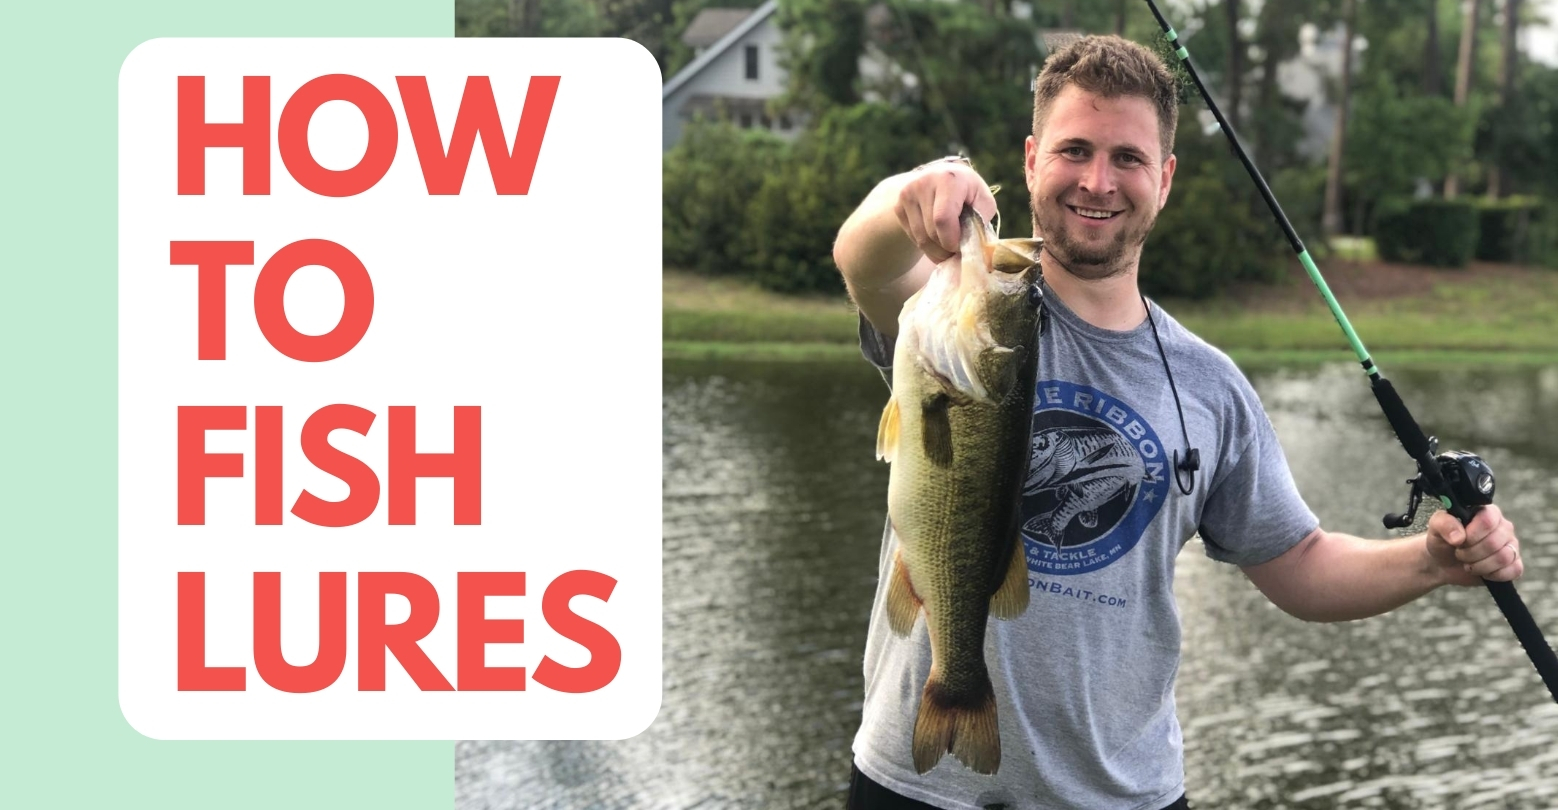 How to Fish with Lures: Lure Types, Knots, Casting, Catching